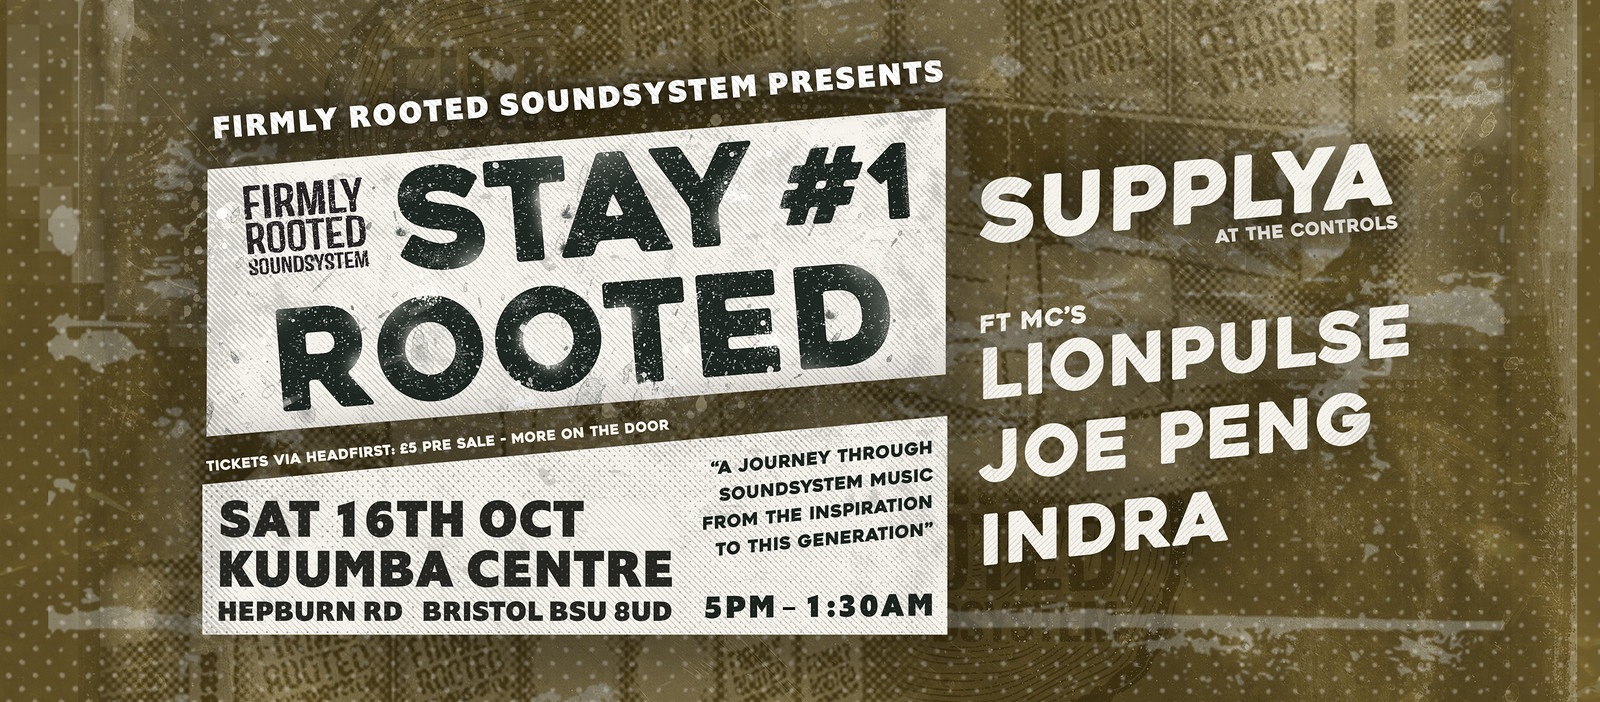 Firmly Rooted Soundsystem Presents: Stay Rooted #1 at Kuumba centre